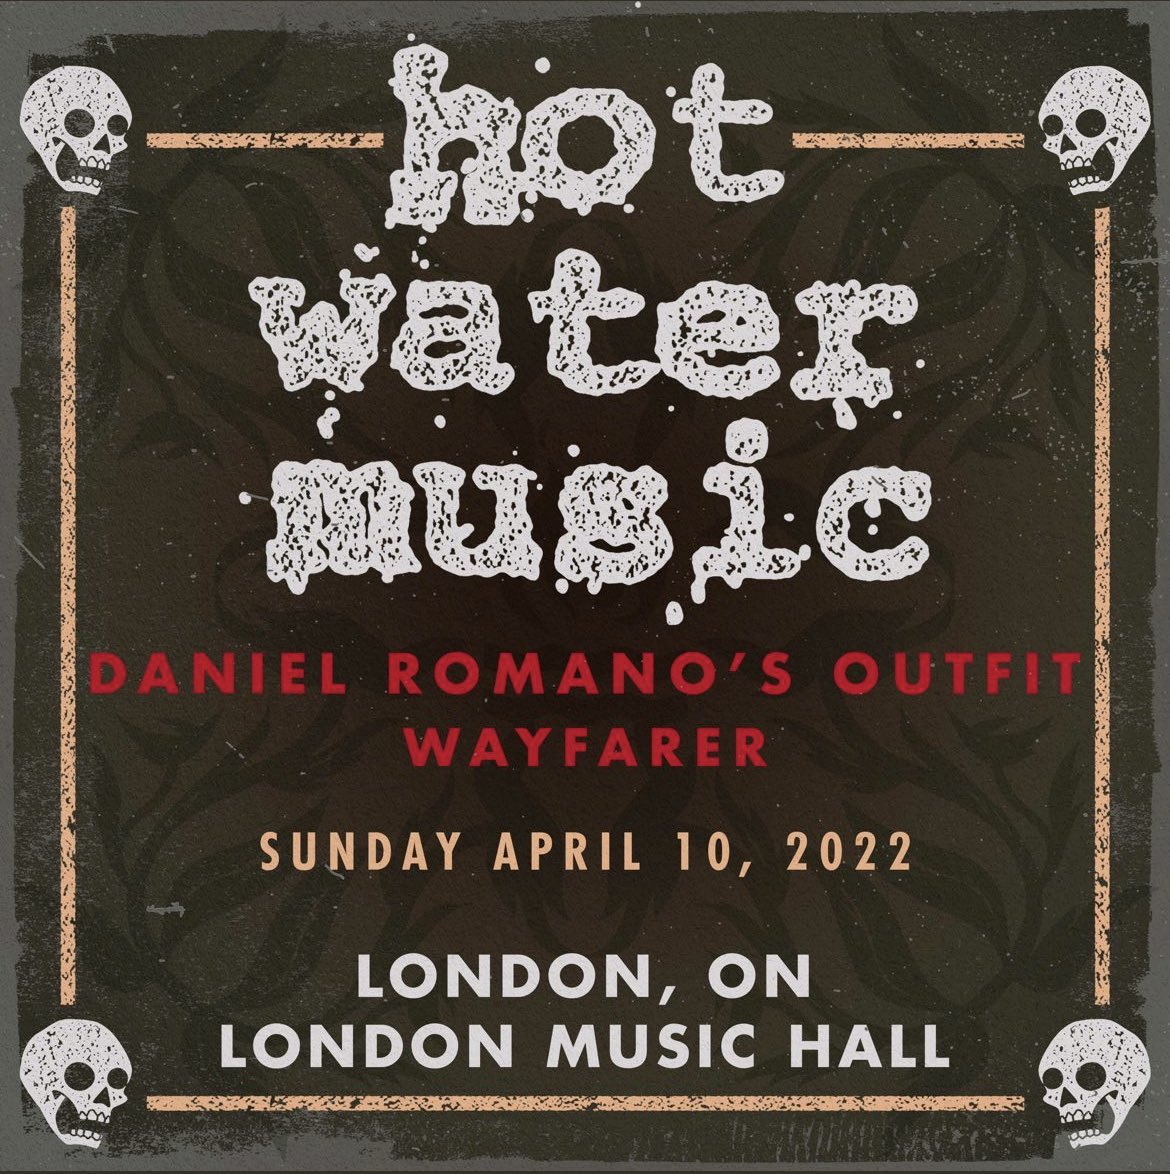 LONDON TONIGHT The great @HotWaterMusic, @TheDanielRomano and us. We’re on at 8 sharp. Ticket links and details in our bio. See you there